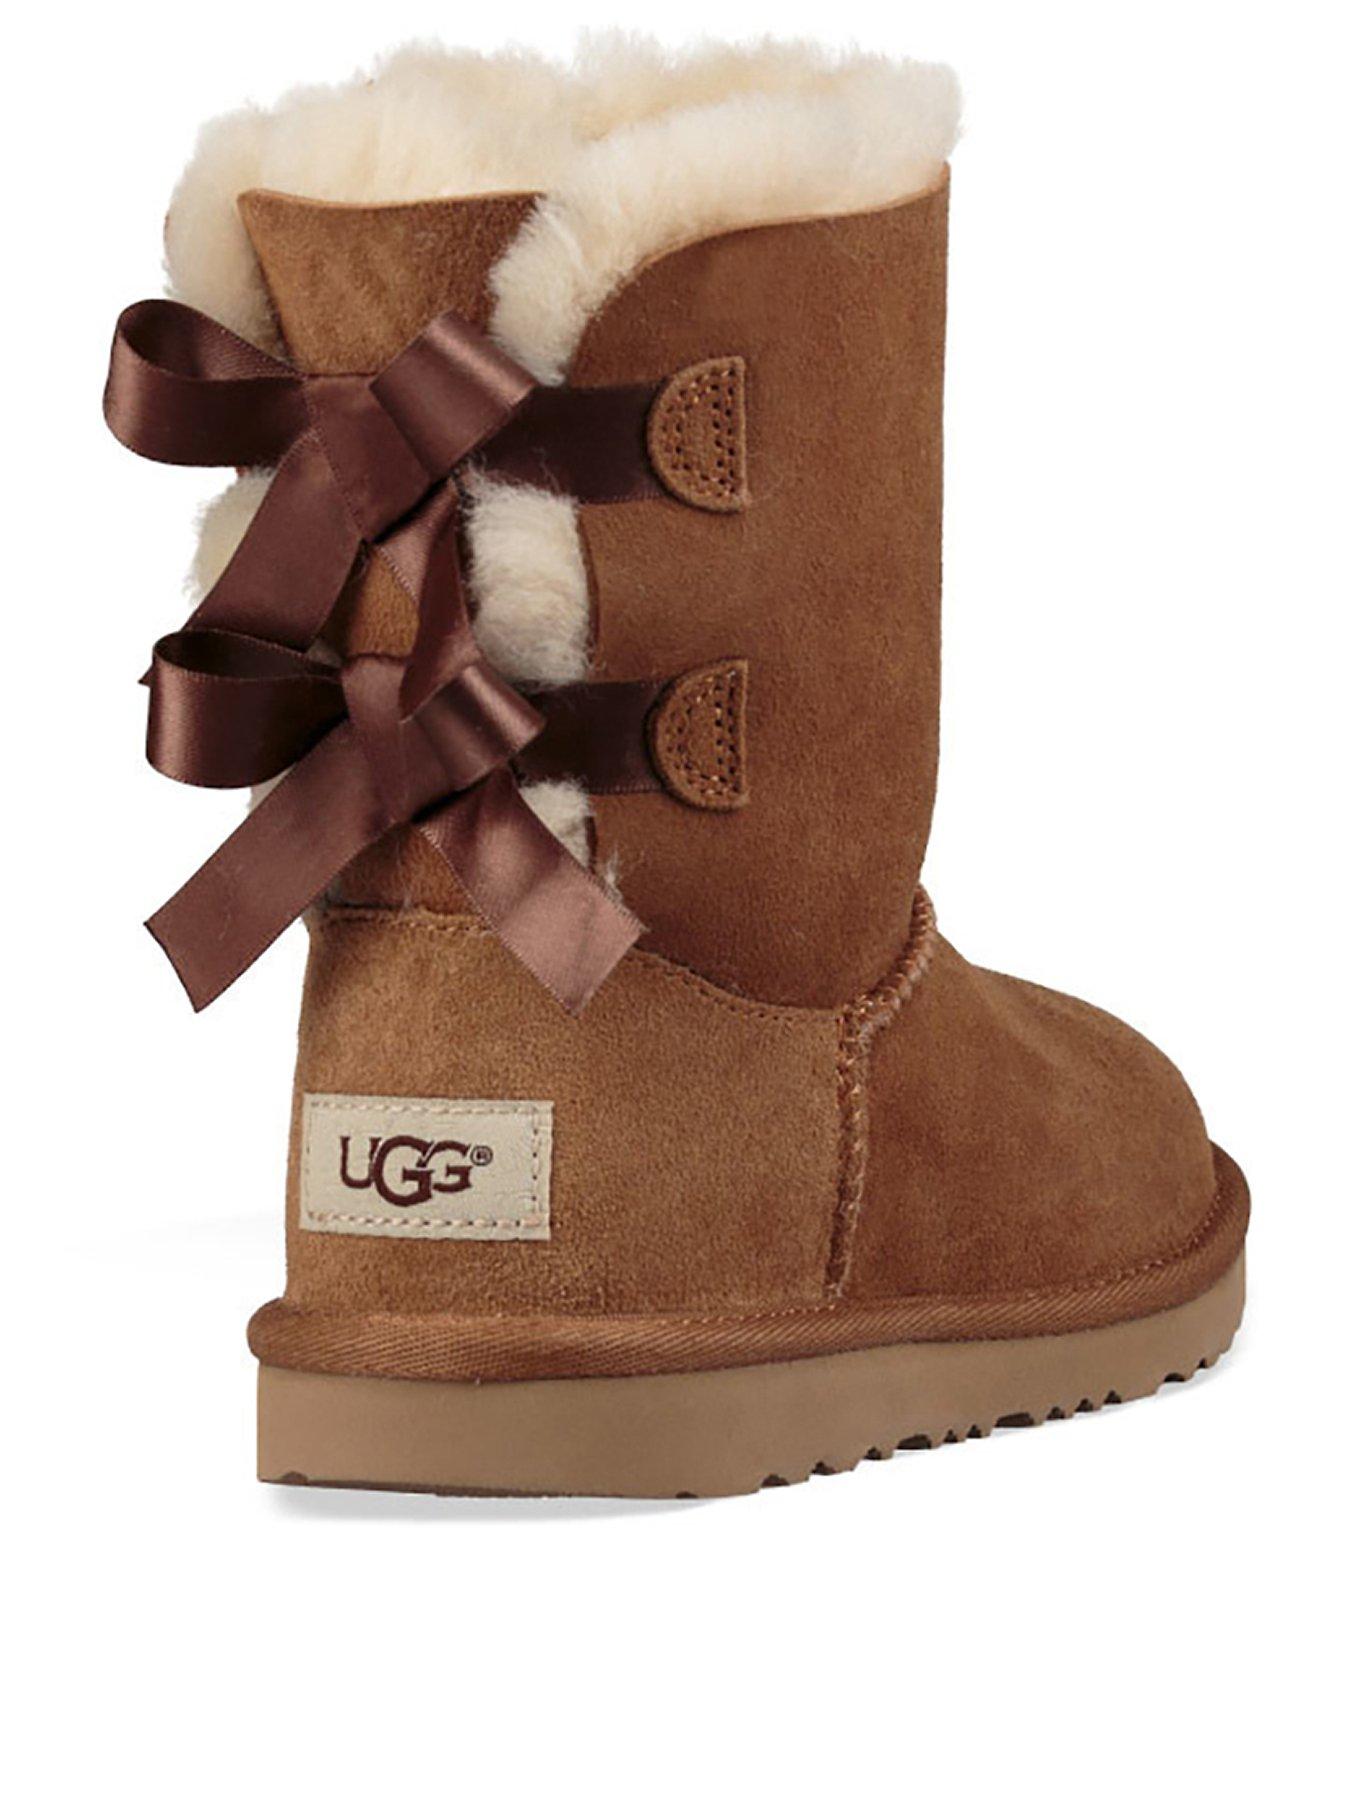 tan ugg boots with bows